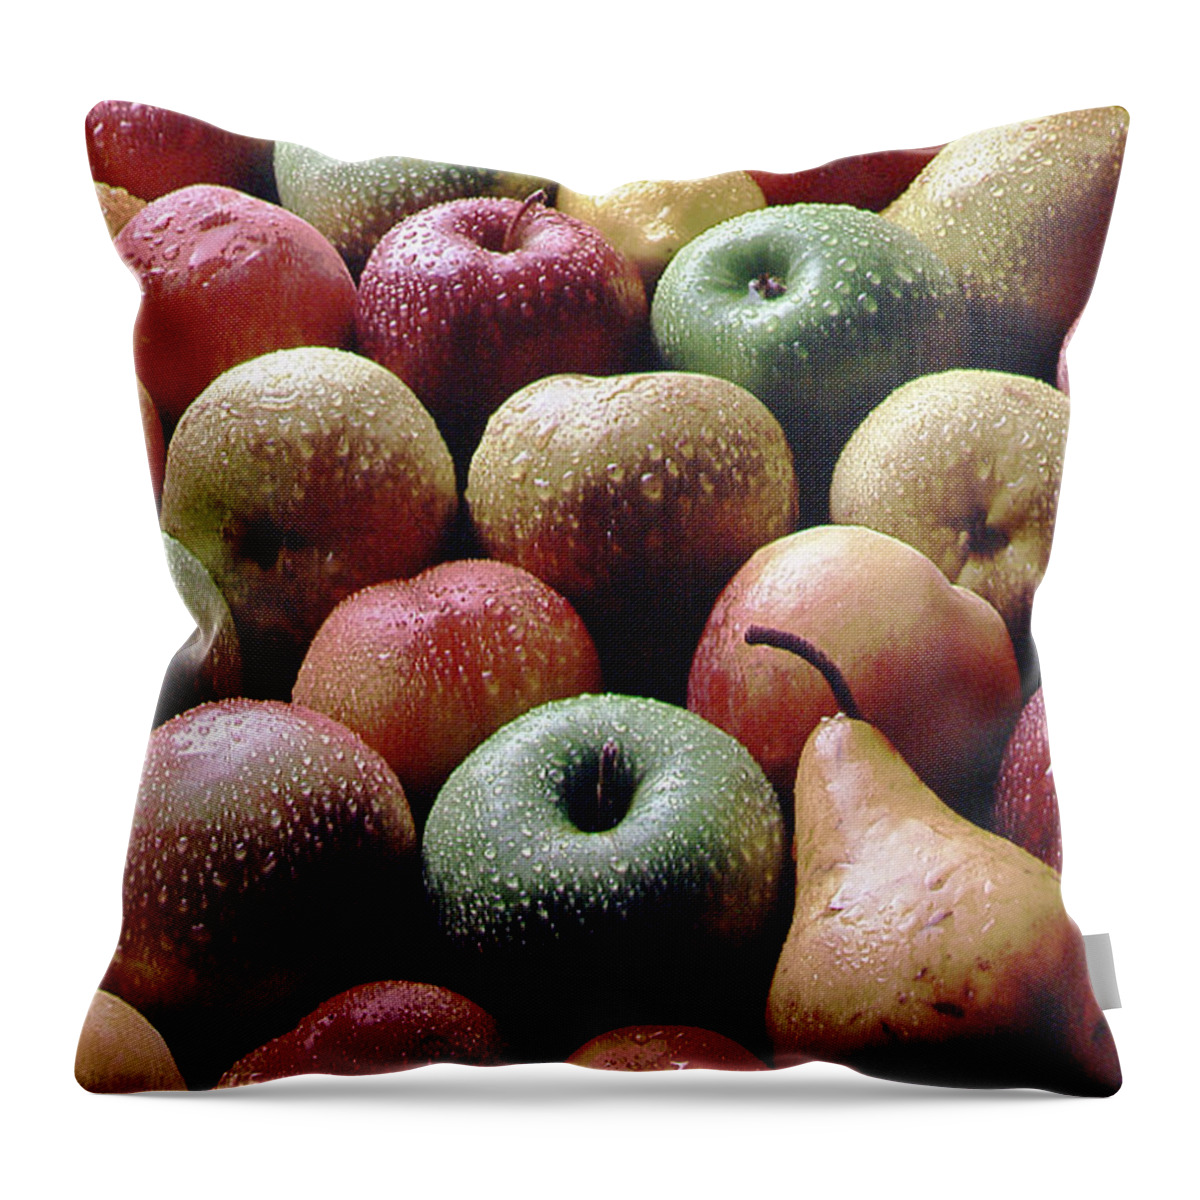 Photo Decor Throw Pillow featuring the photograph Freshly Picked by Steven Huszar